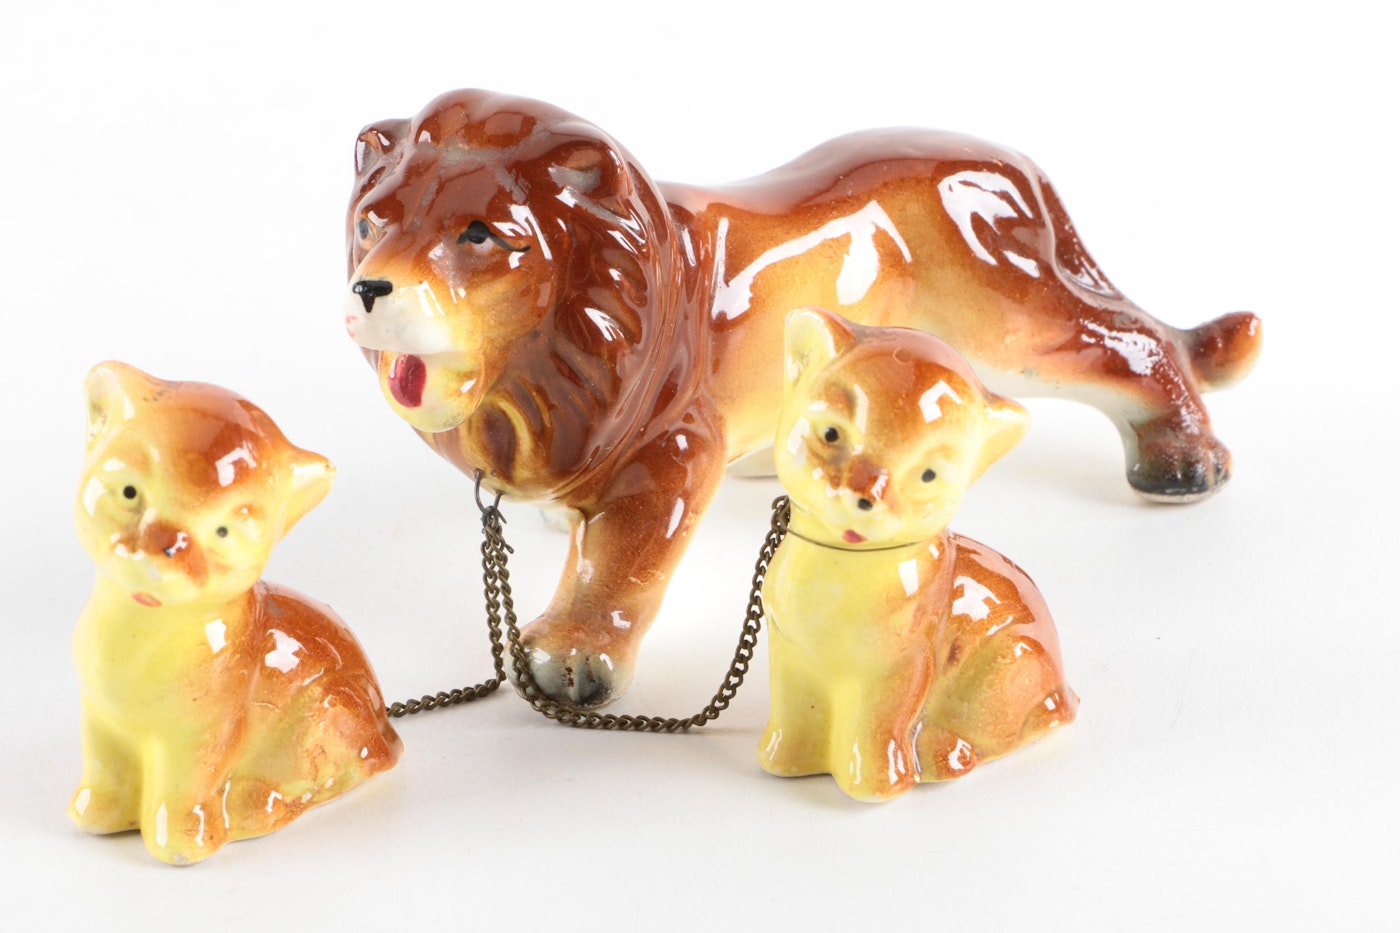 Vintage Porcelain Animal Figurines with Babies from Japan | EBTH